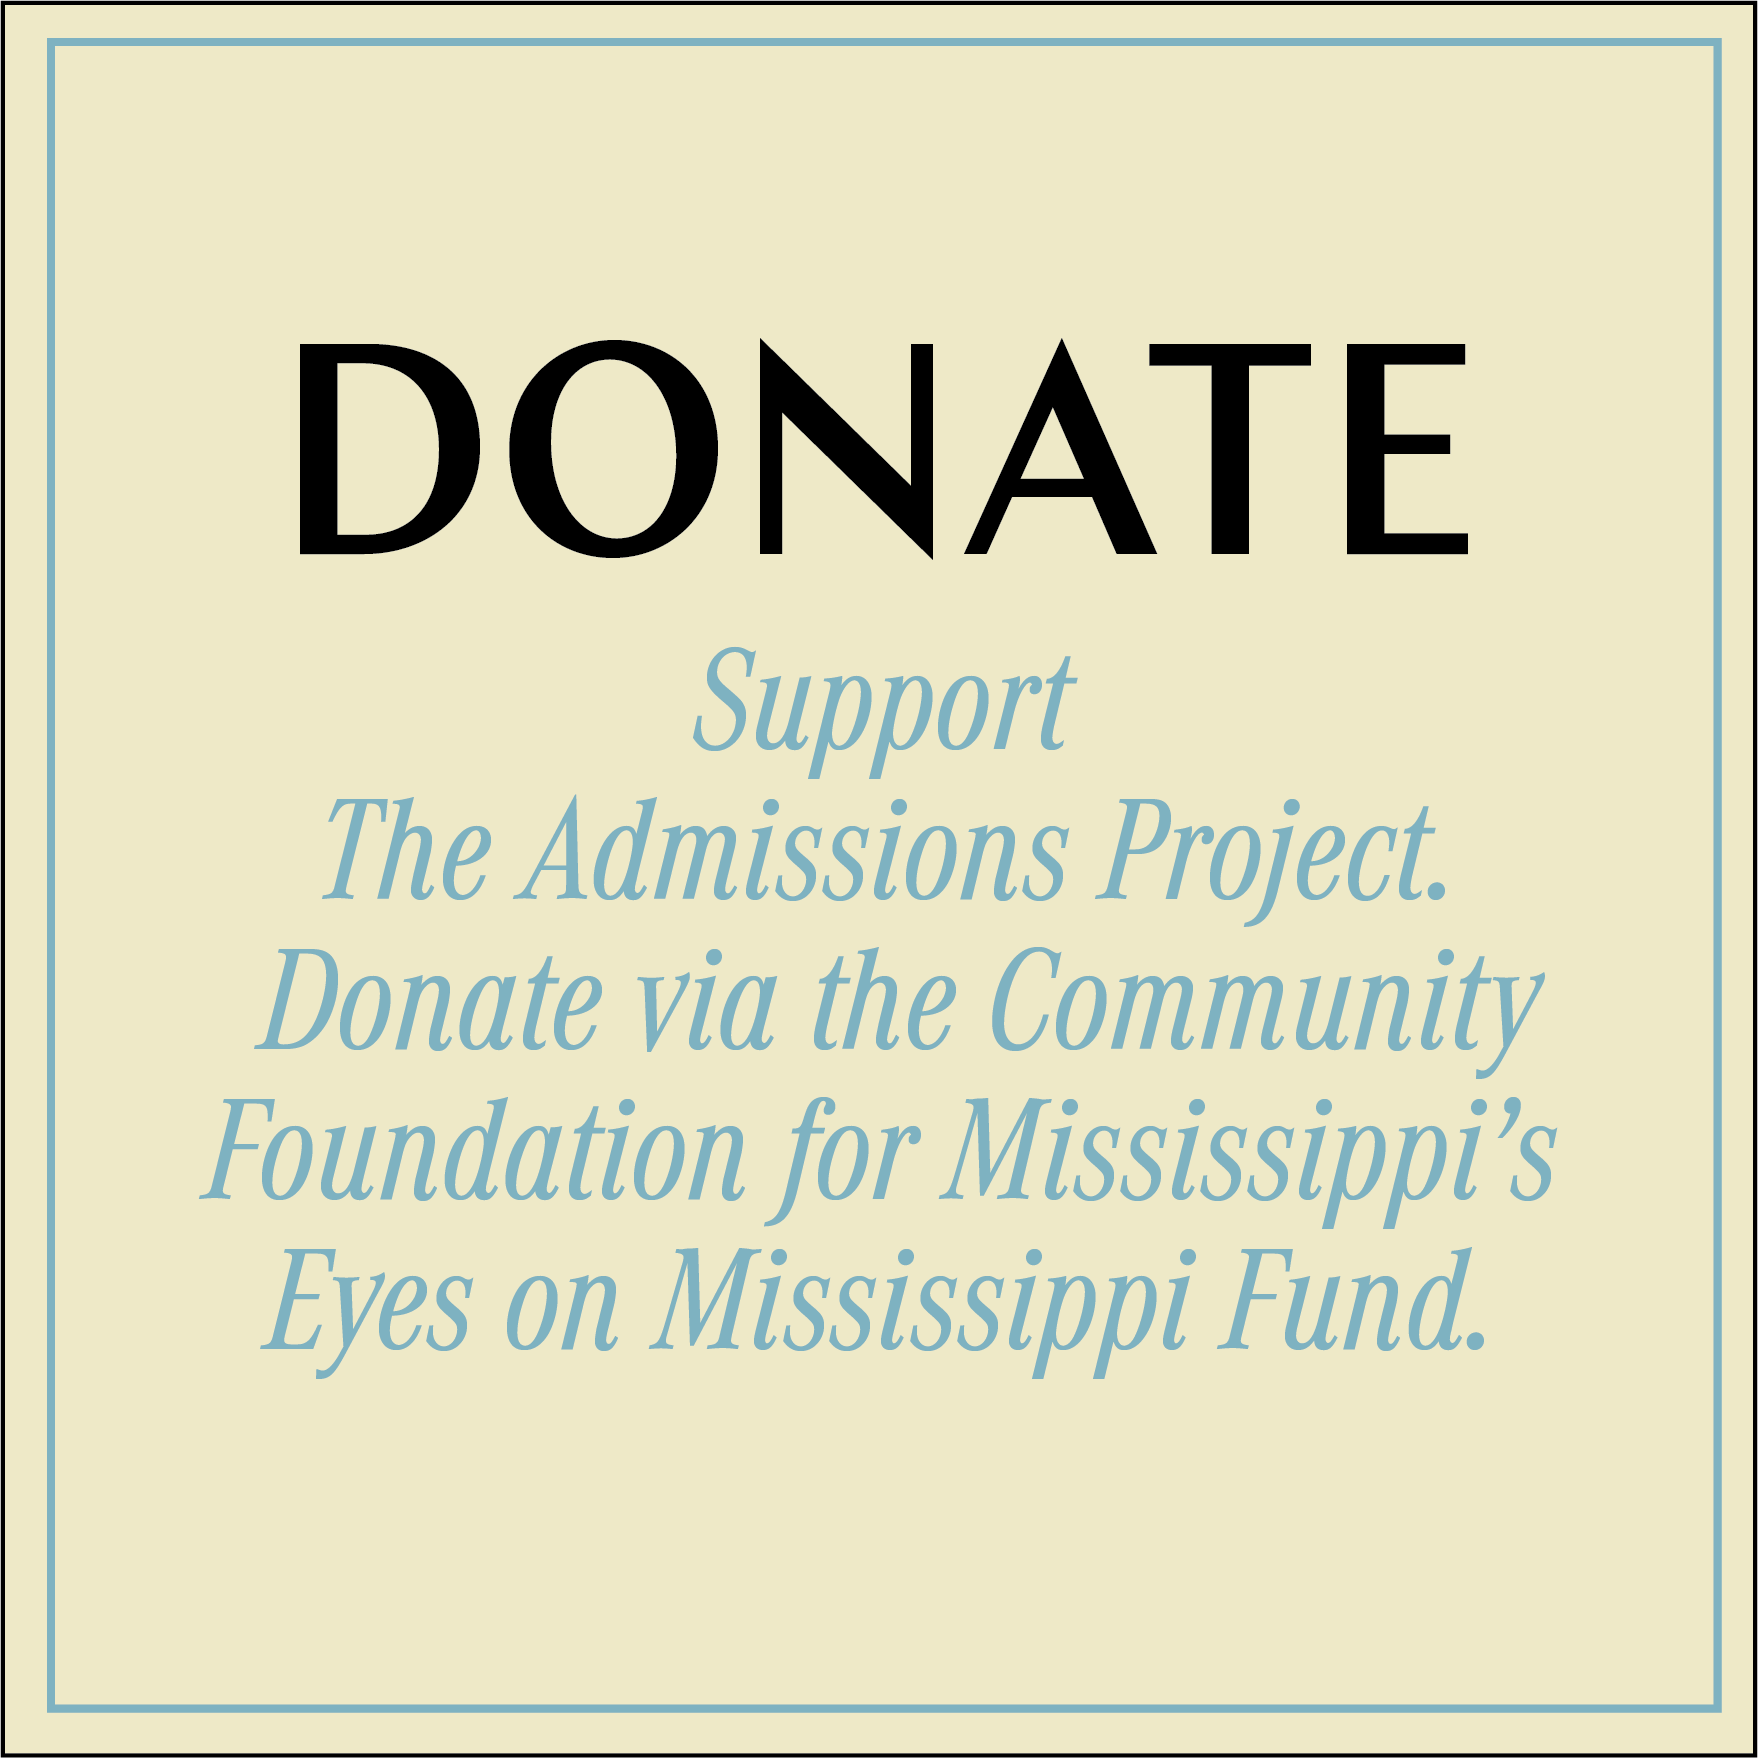 Donate to Admissions Project